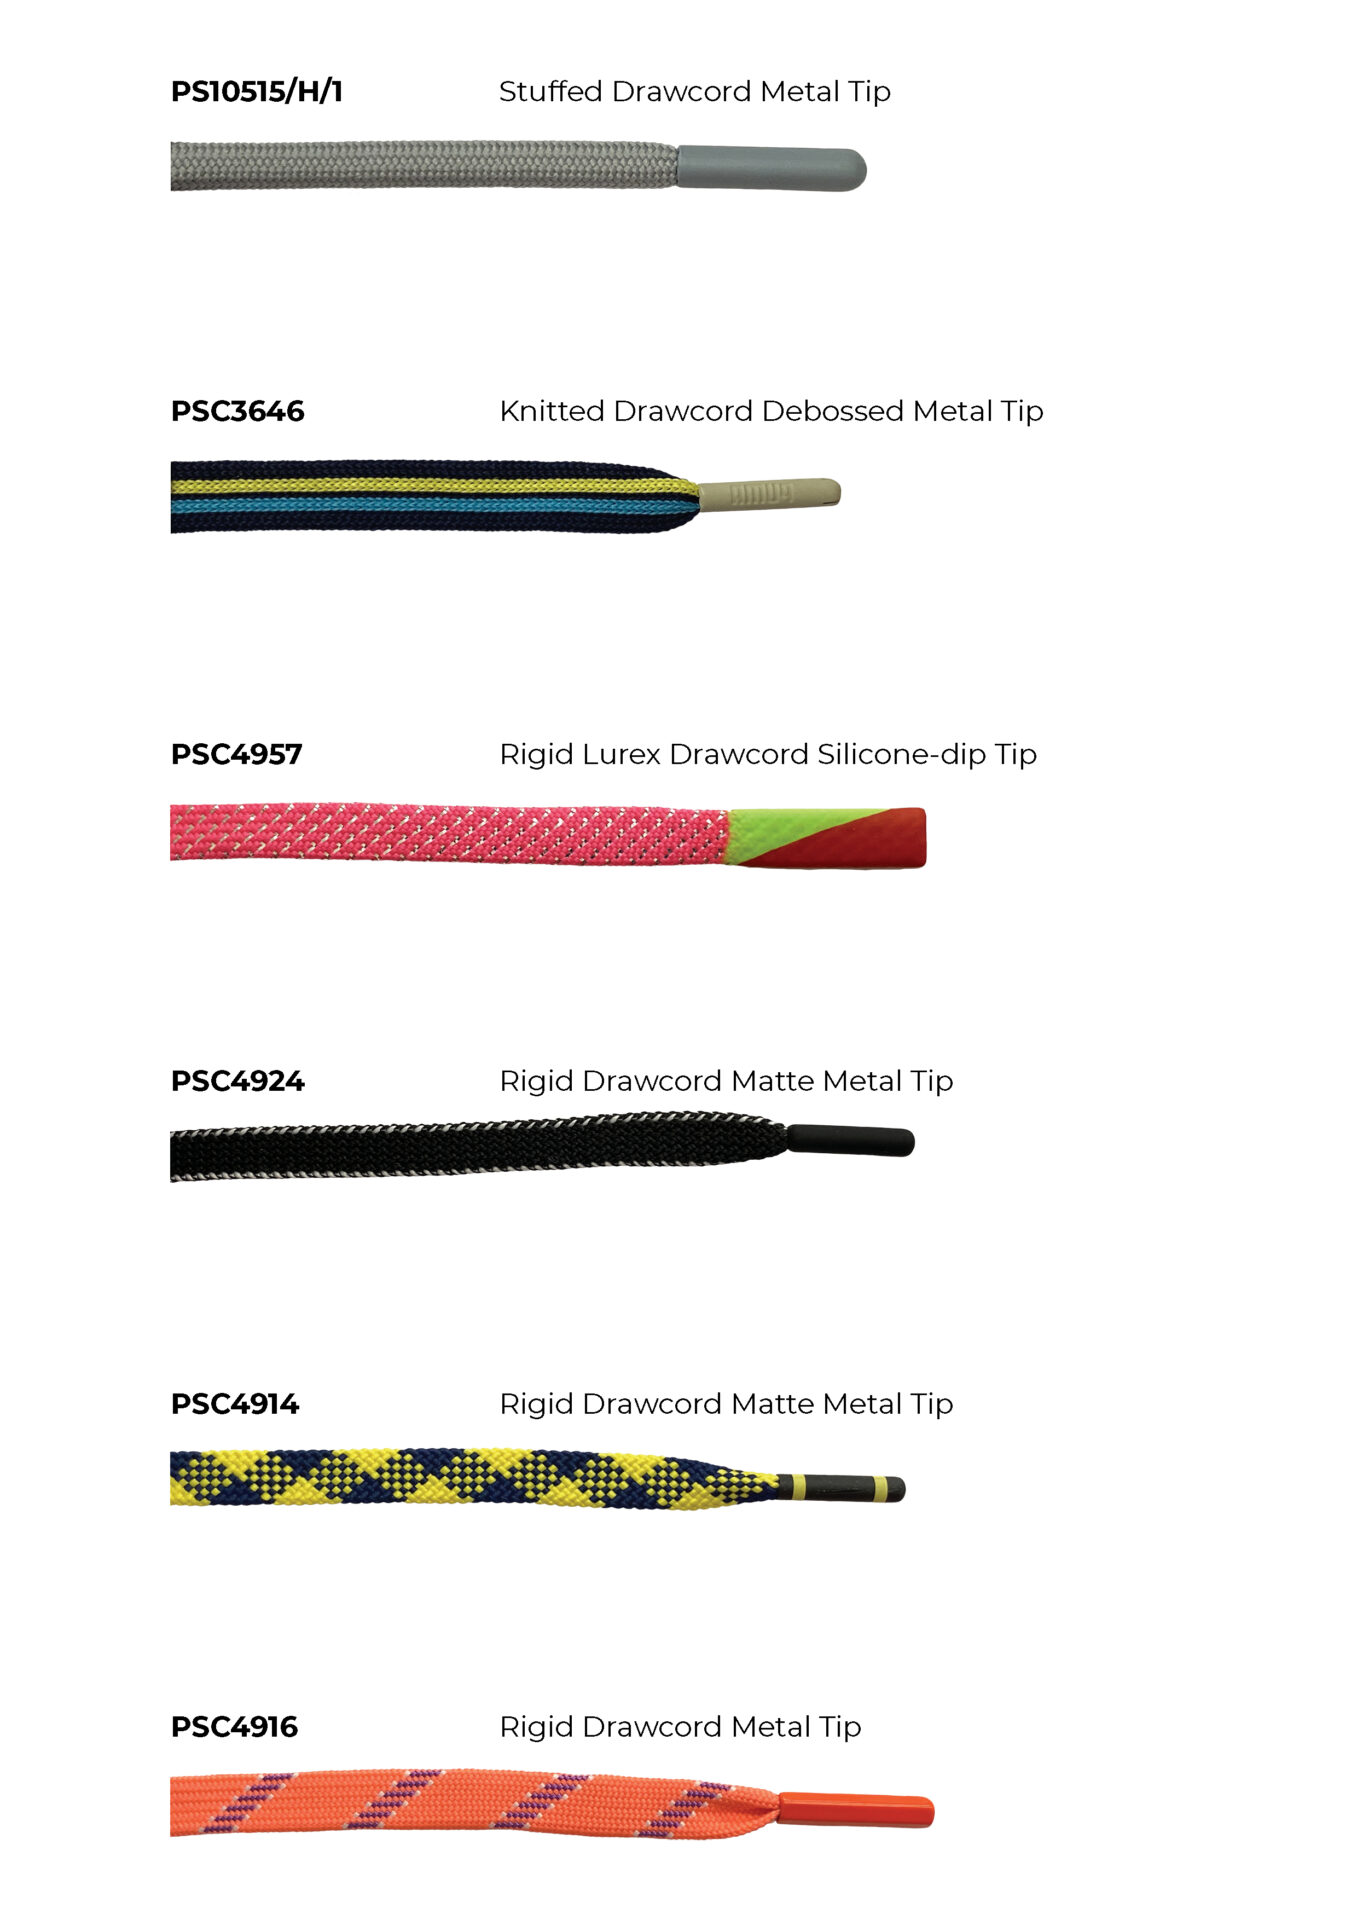 Check out our Products page for more information on our Drawcords and tips